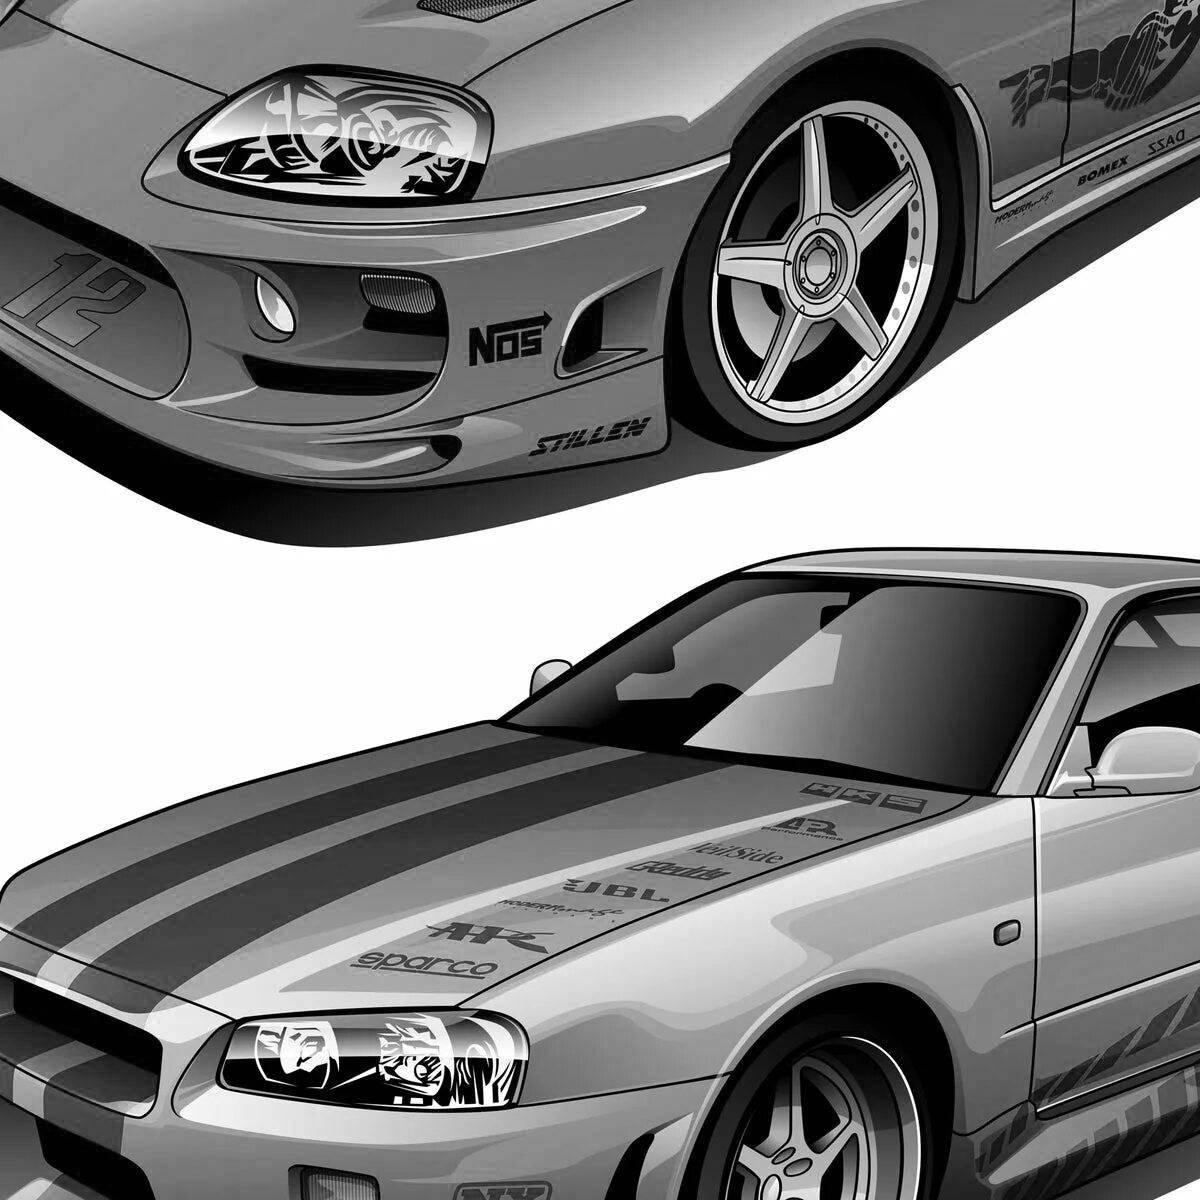 Luxurious nissan skyline from fast and furious 2